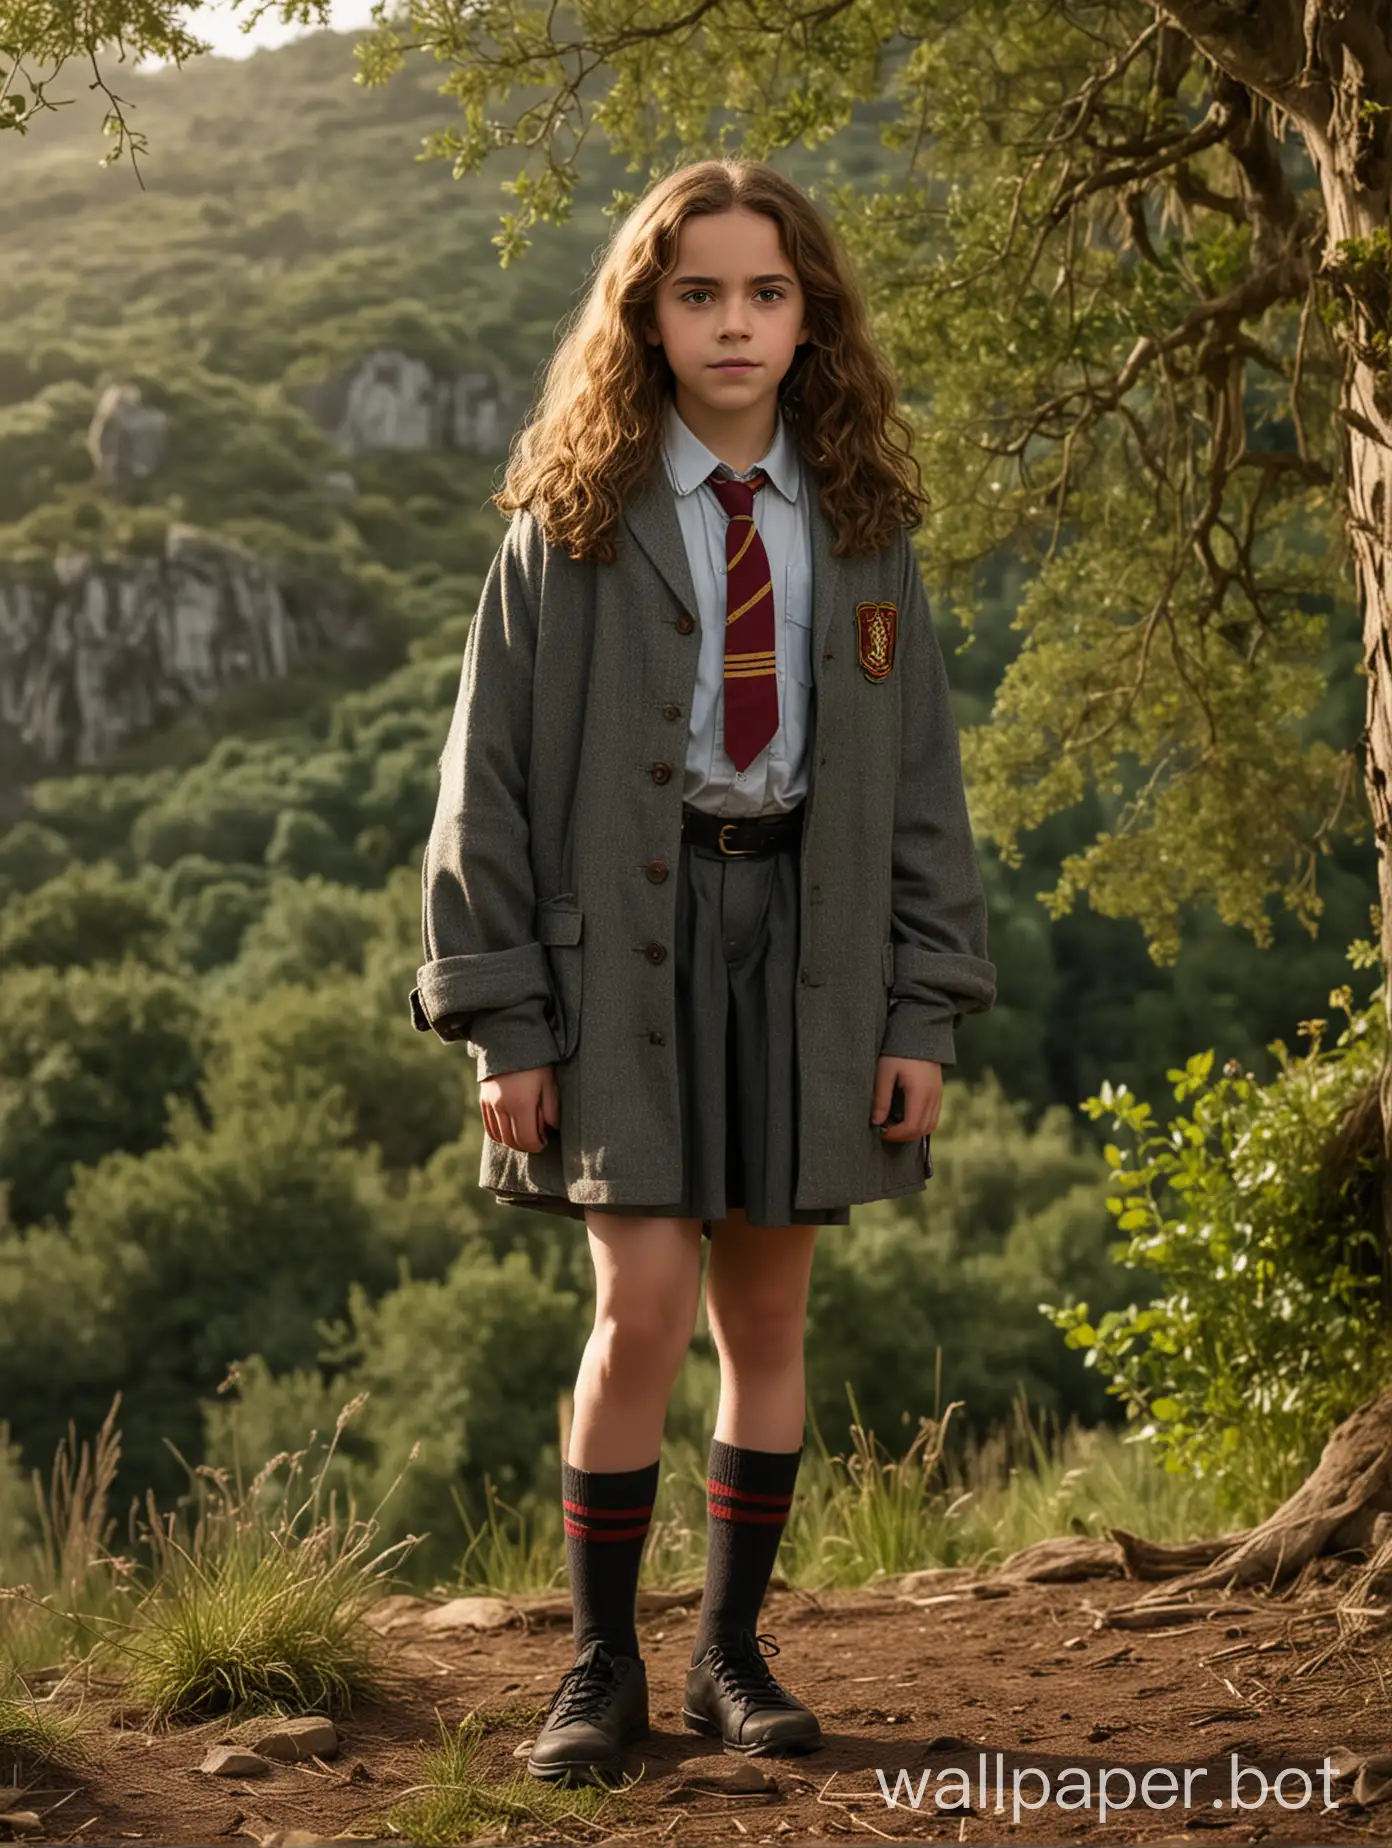 a girl of 11 years old, full height, Hermione Granger, against a nature backdrop